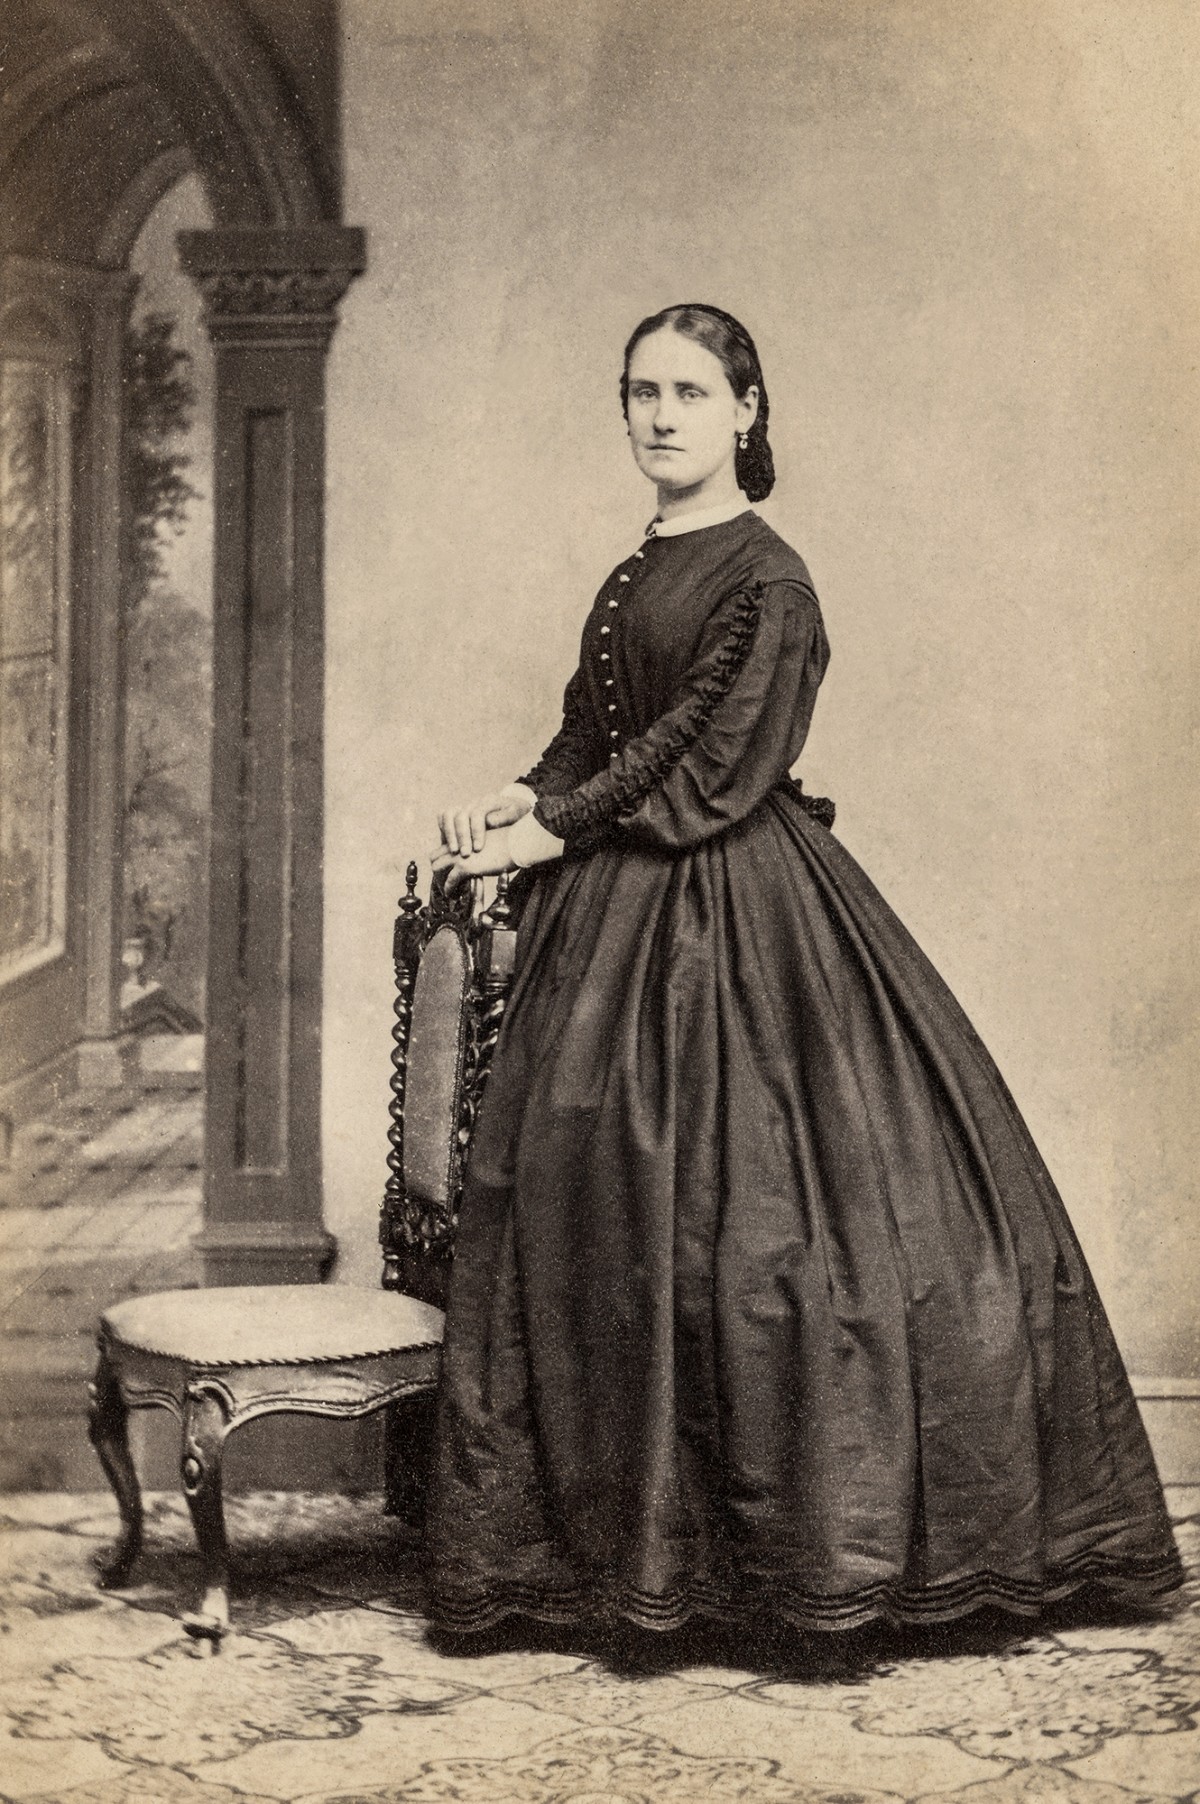 Unidentified woman by James Ireland 1860s